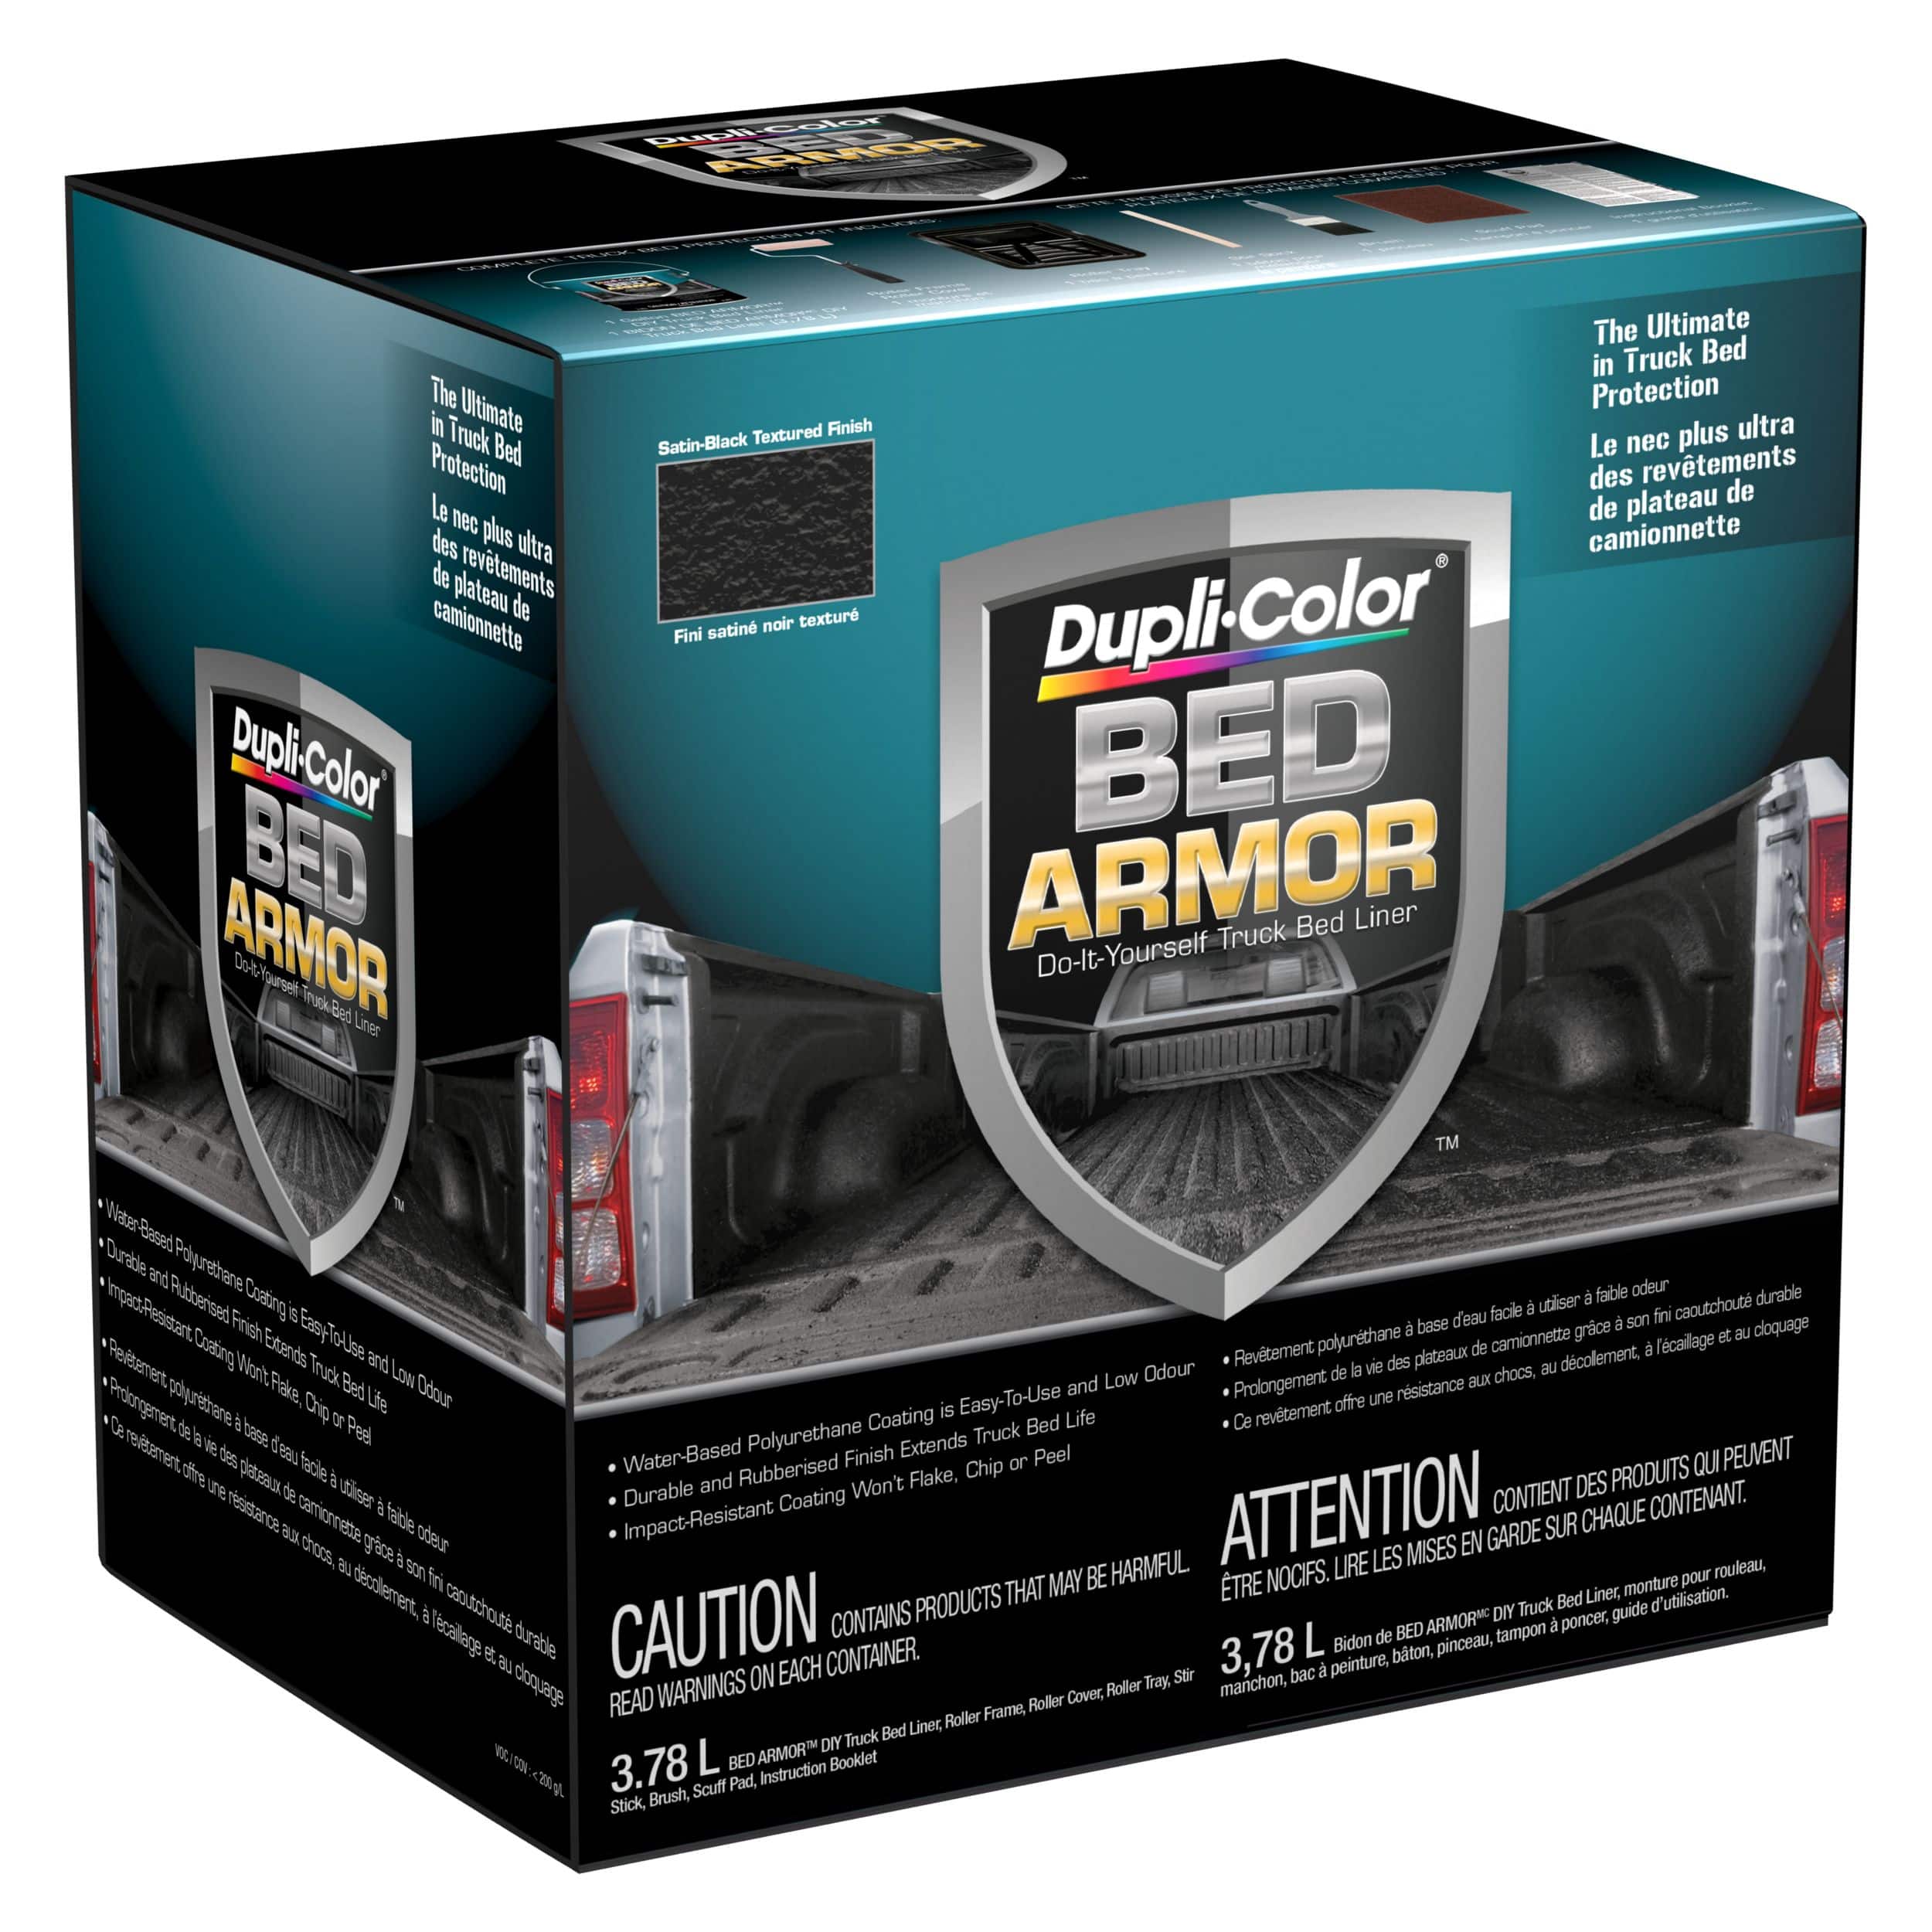 https://media-www.canadiantire.ca/product/automotive/car-care-accessories/auto-body-repair/0478001/bed-armor-truck-bed-liner-gallon-kit-1b2db5a1-2adc-4d80-b98b-e4474f57a275-jpgrendition.jpg